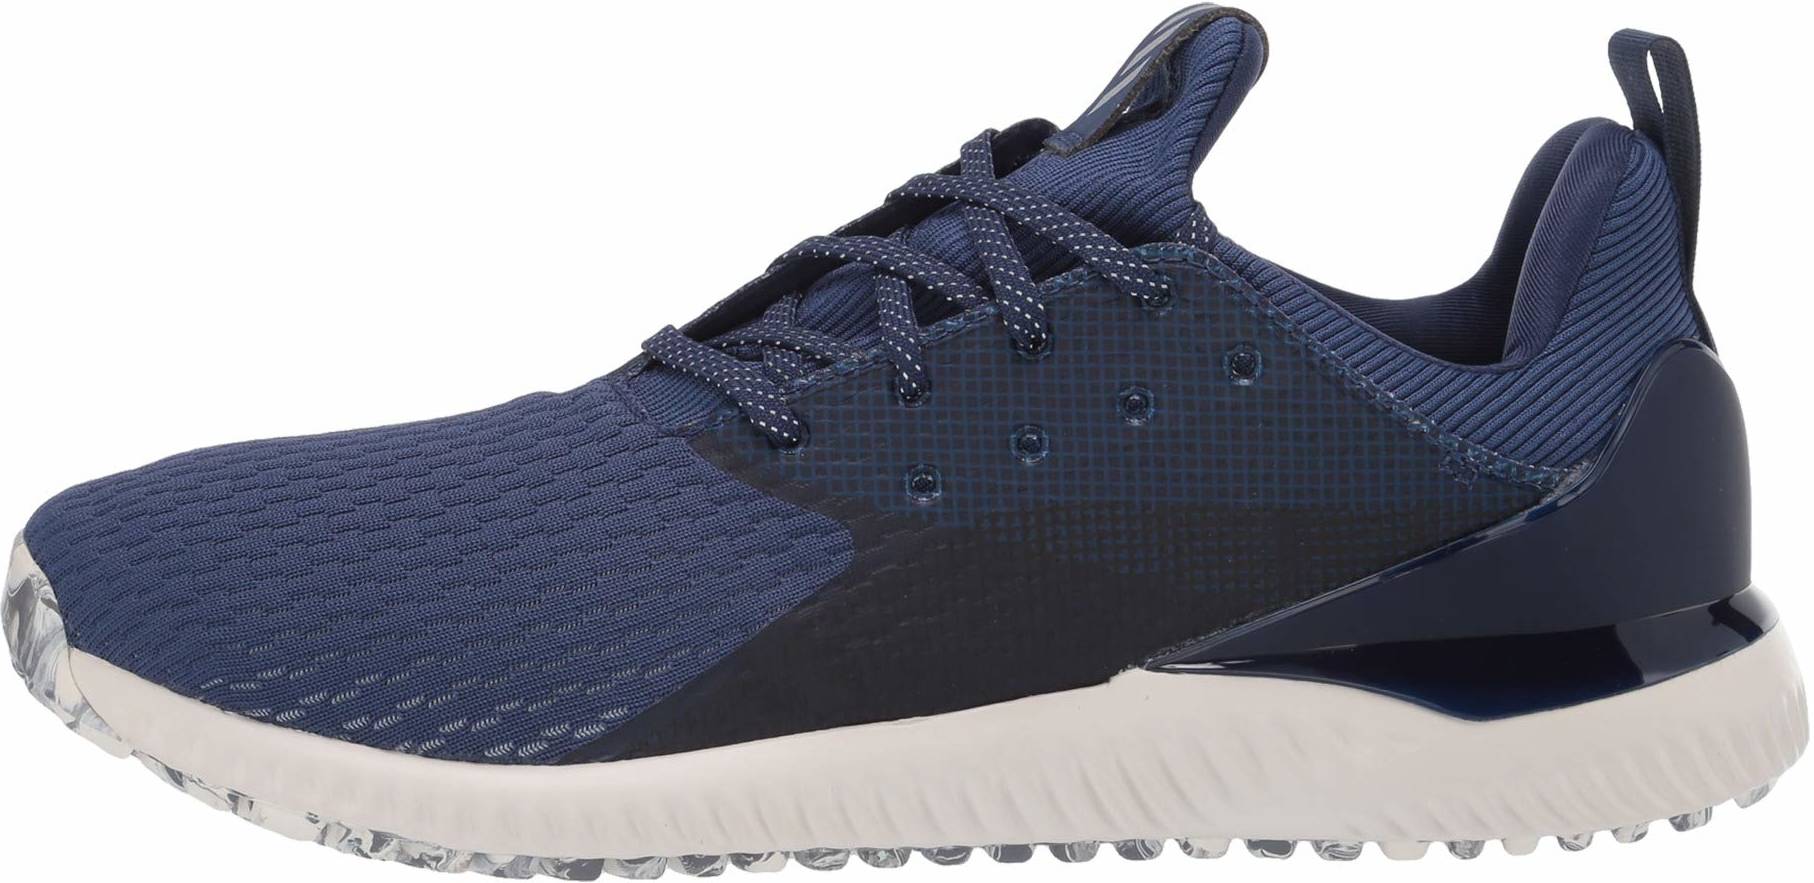 Adidas Adicross Bounce 2.0 Review Facts, Deals ($55) |